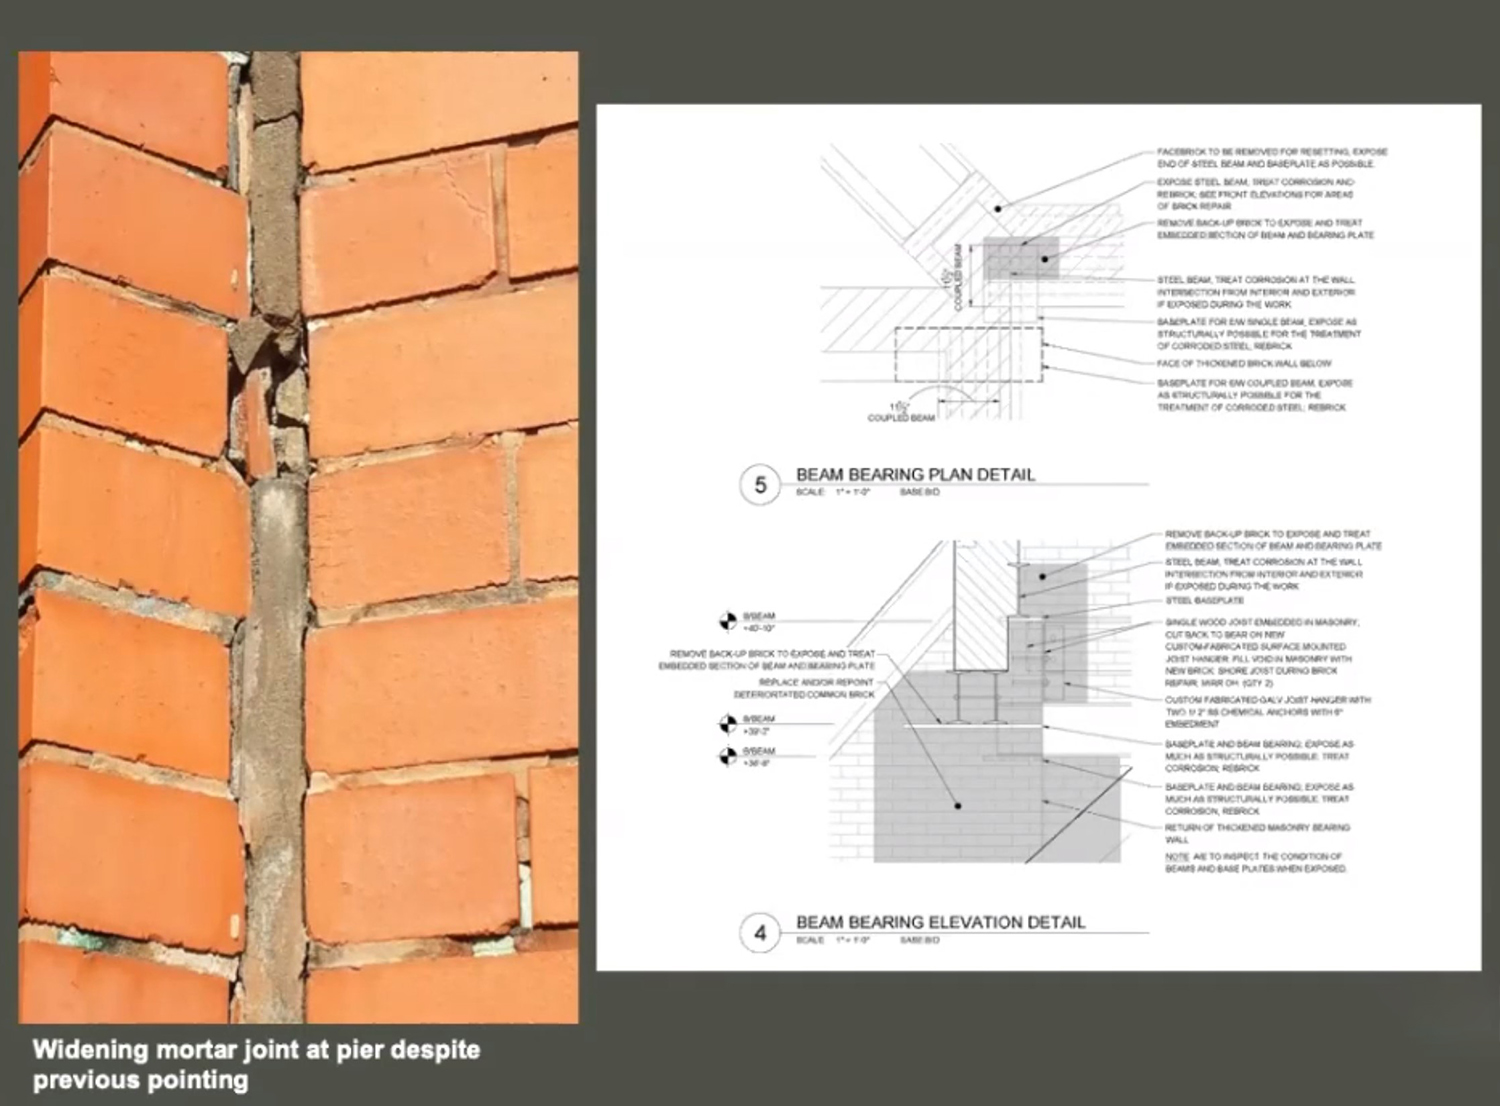 Widening Mortar Joint Conditions and Drawings. Drawings by Wauters Design